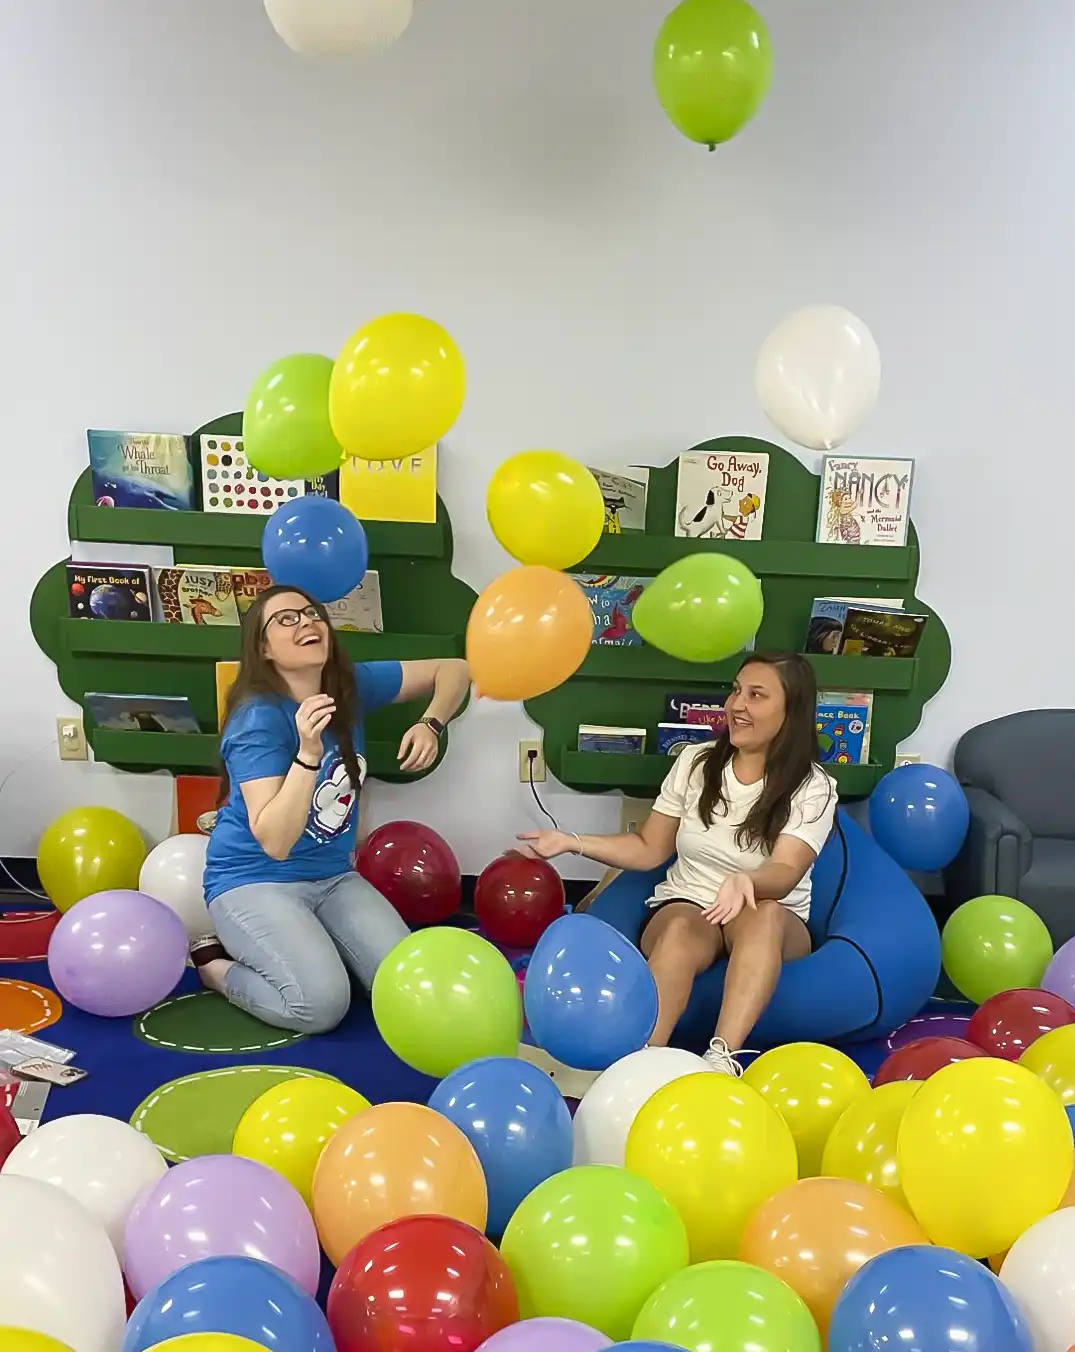 Jillian Long and McKenzie Williams playing with balloons in Jeremiah's Place play area